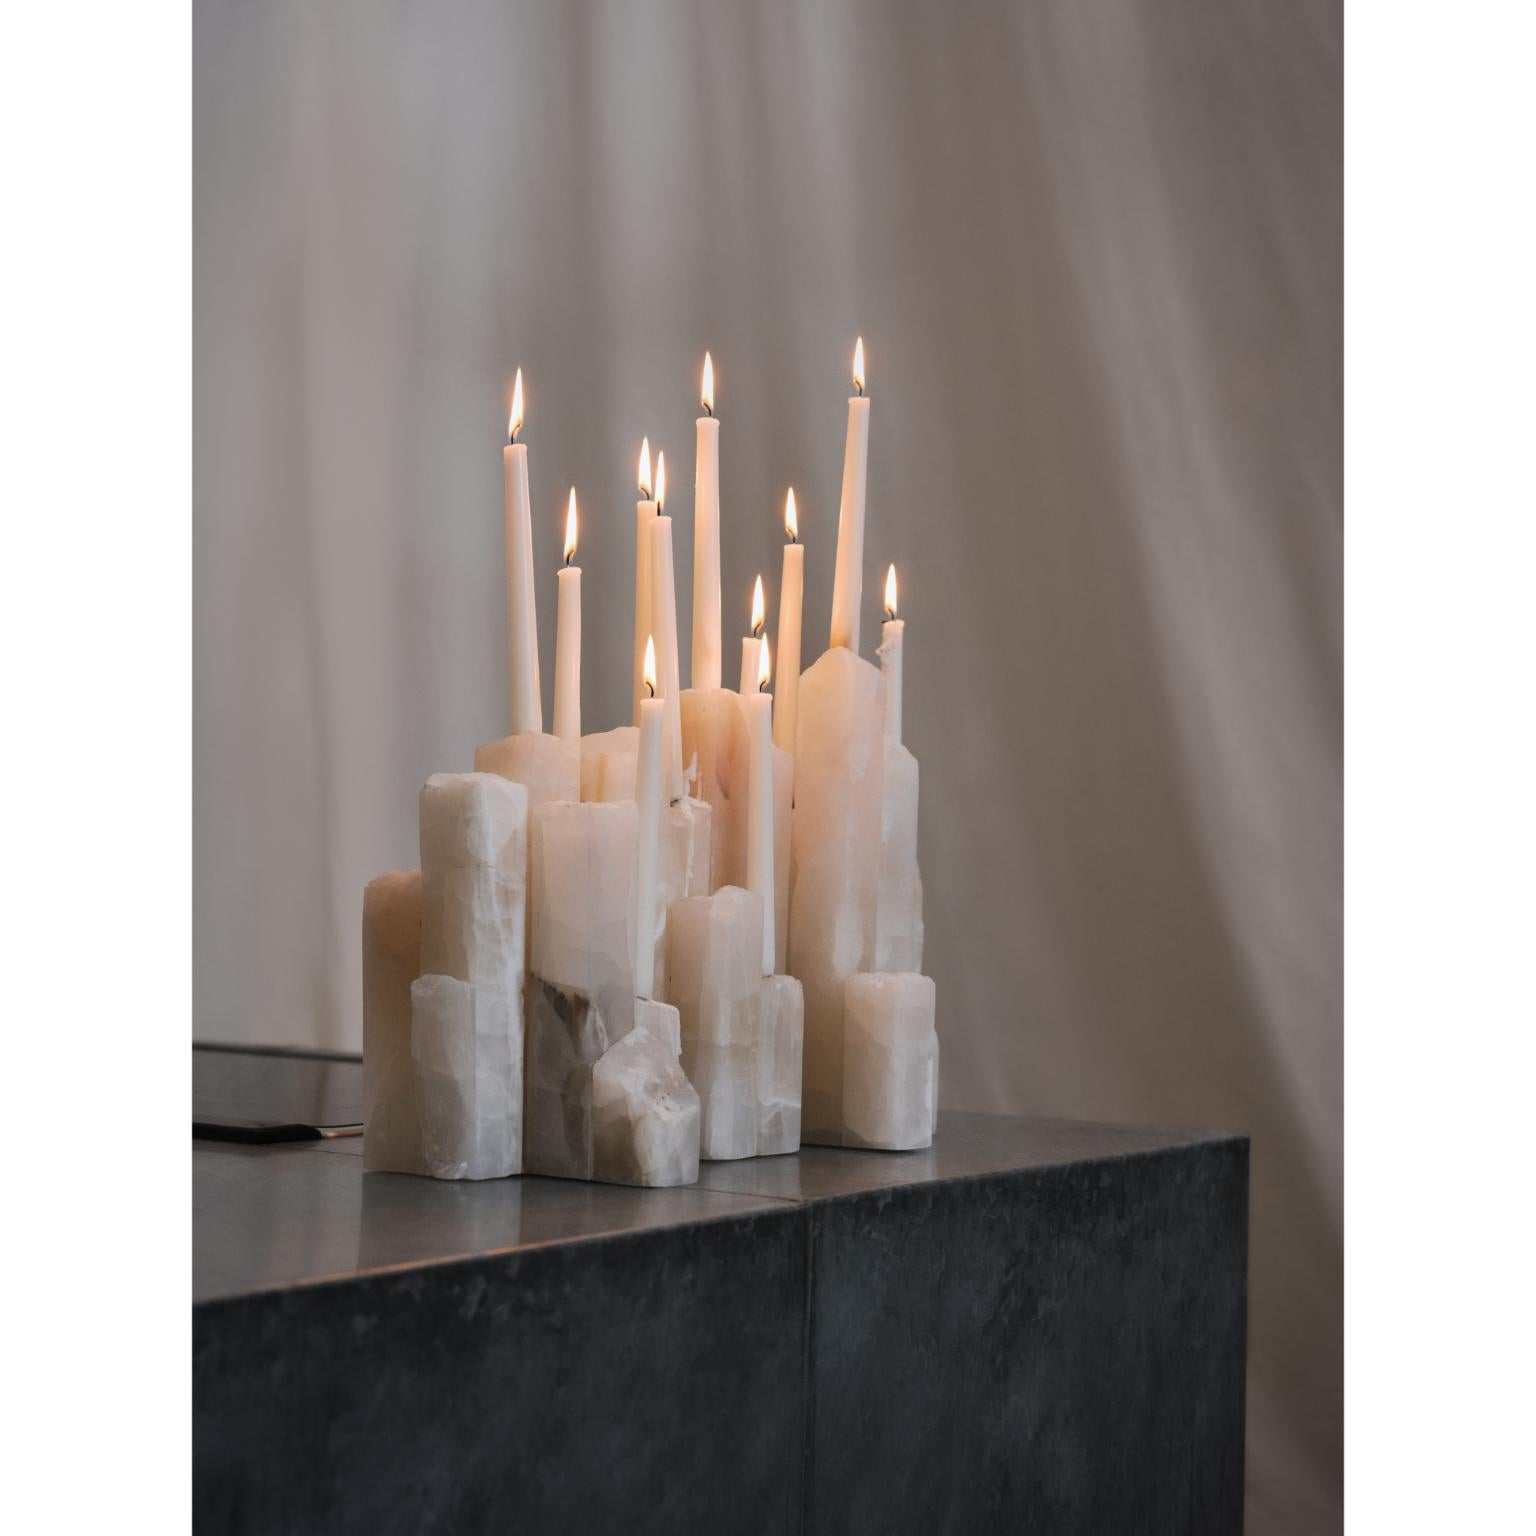 Candelabra Ritus 03 by Andres Monnier
*Limited Edition Of 8 Pieces*

Dimensions: D56 x W24 x H37 cm.
Materials: White Onyx Stone.


   Andrés Monnier is a Mexican artist born in Guadalajara and is based in Ensenada. His purpose is to create